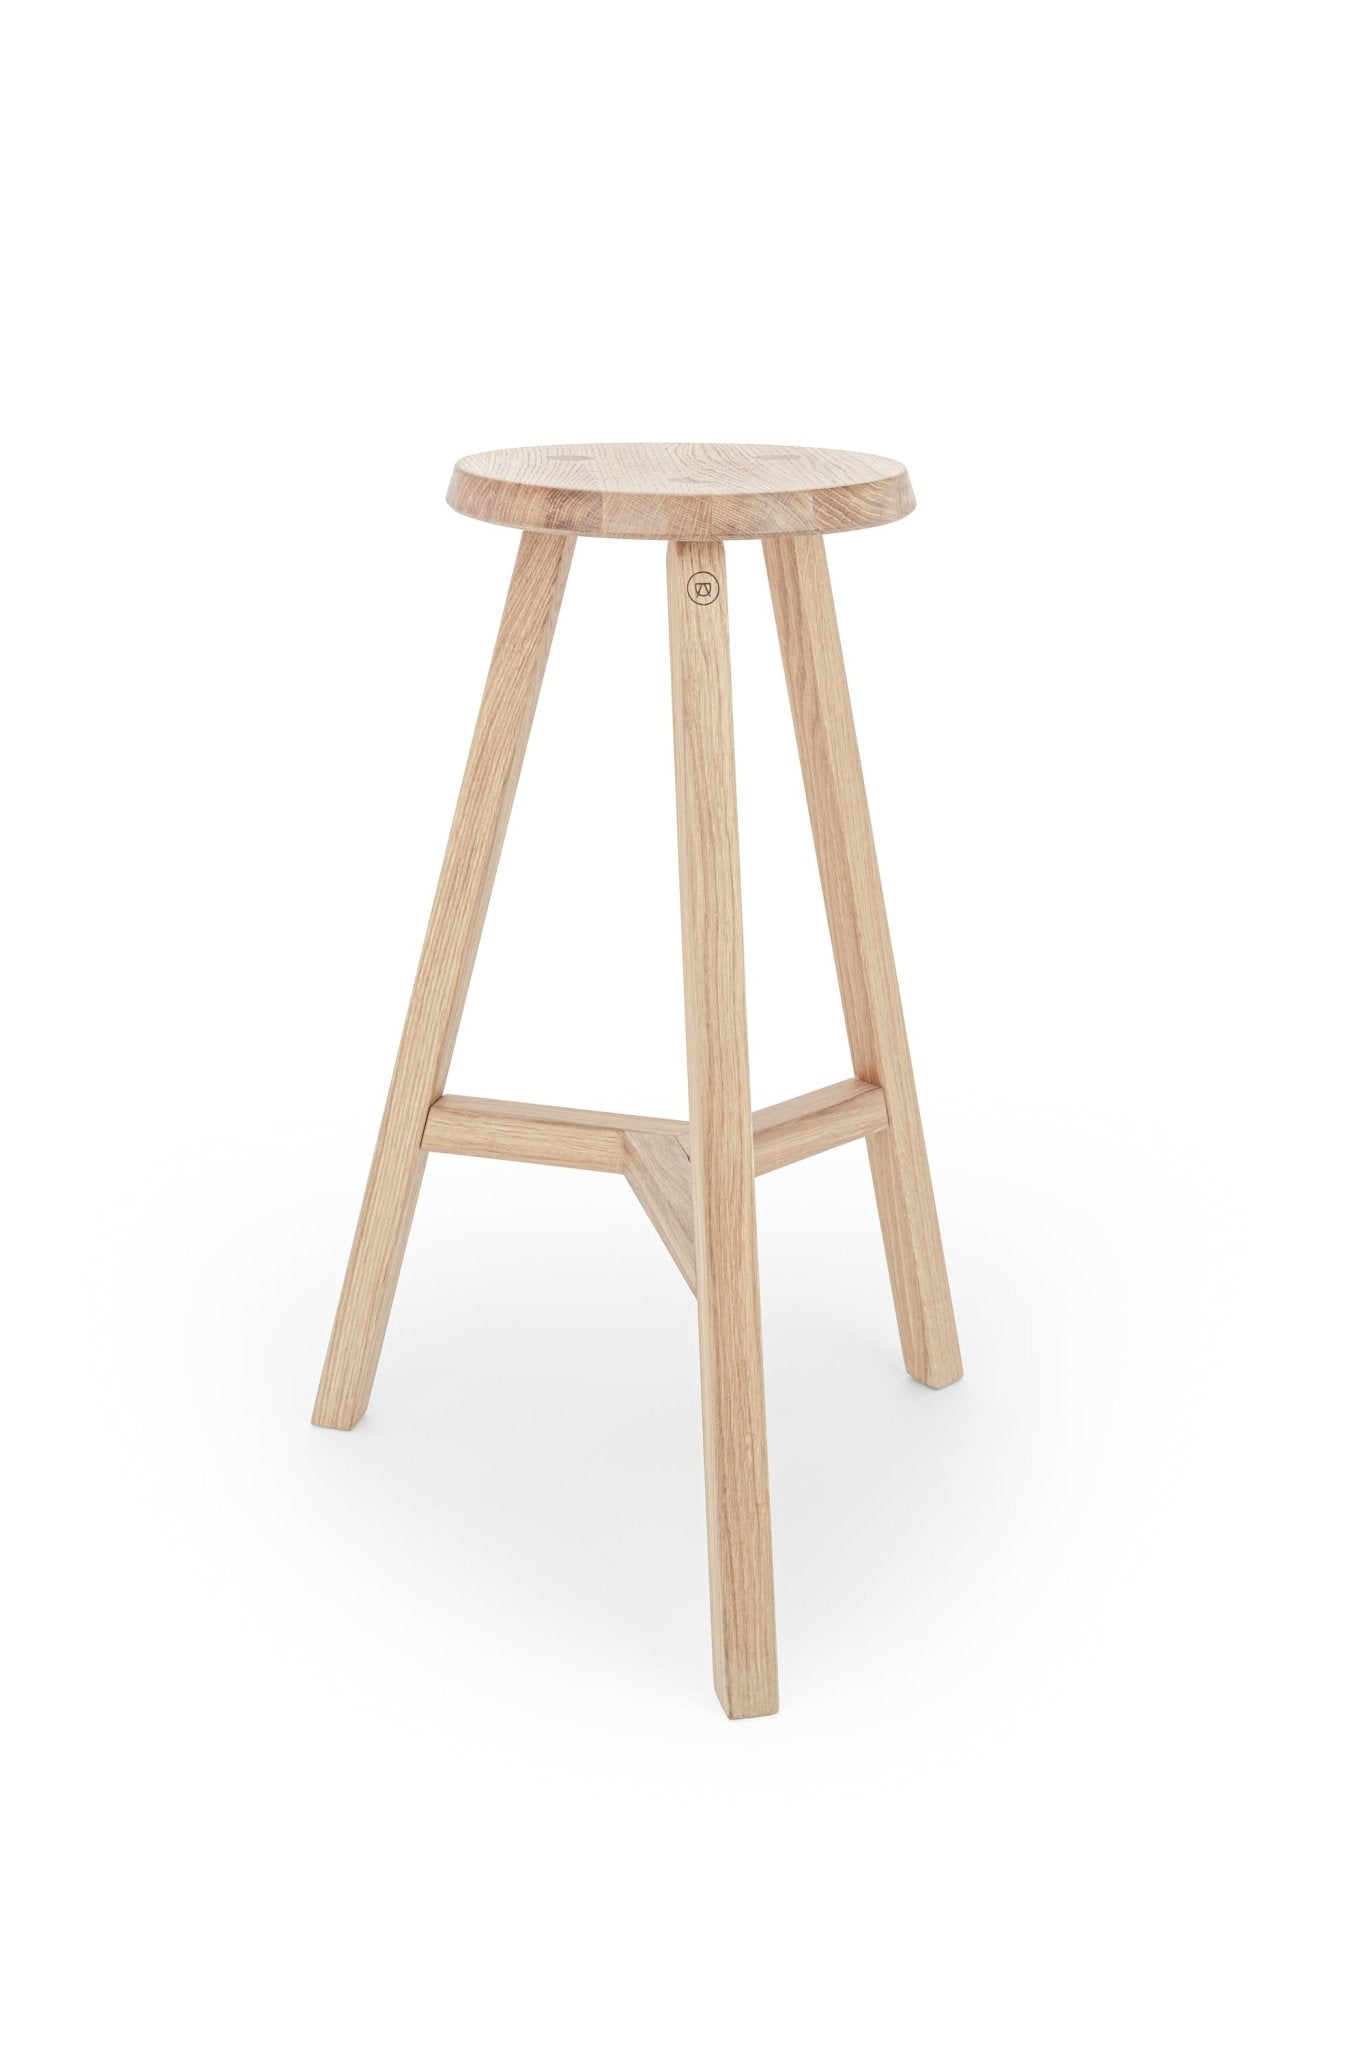 Filigree bar stool “Lia” refined in a natural look